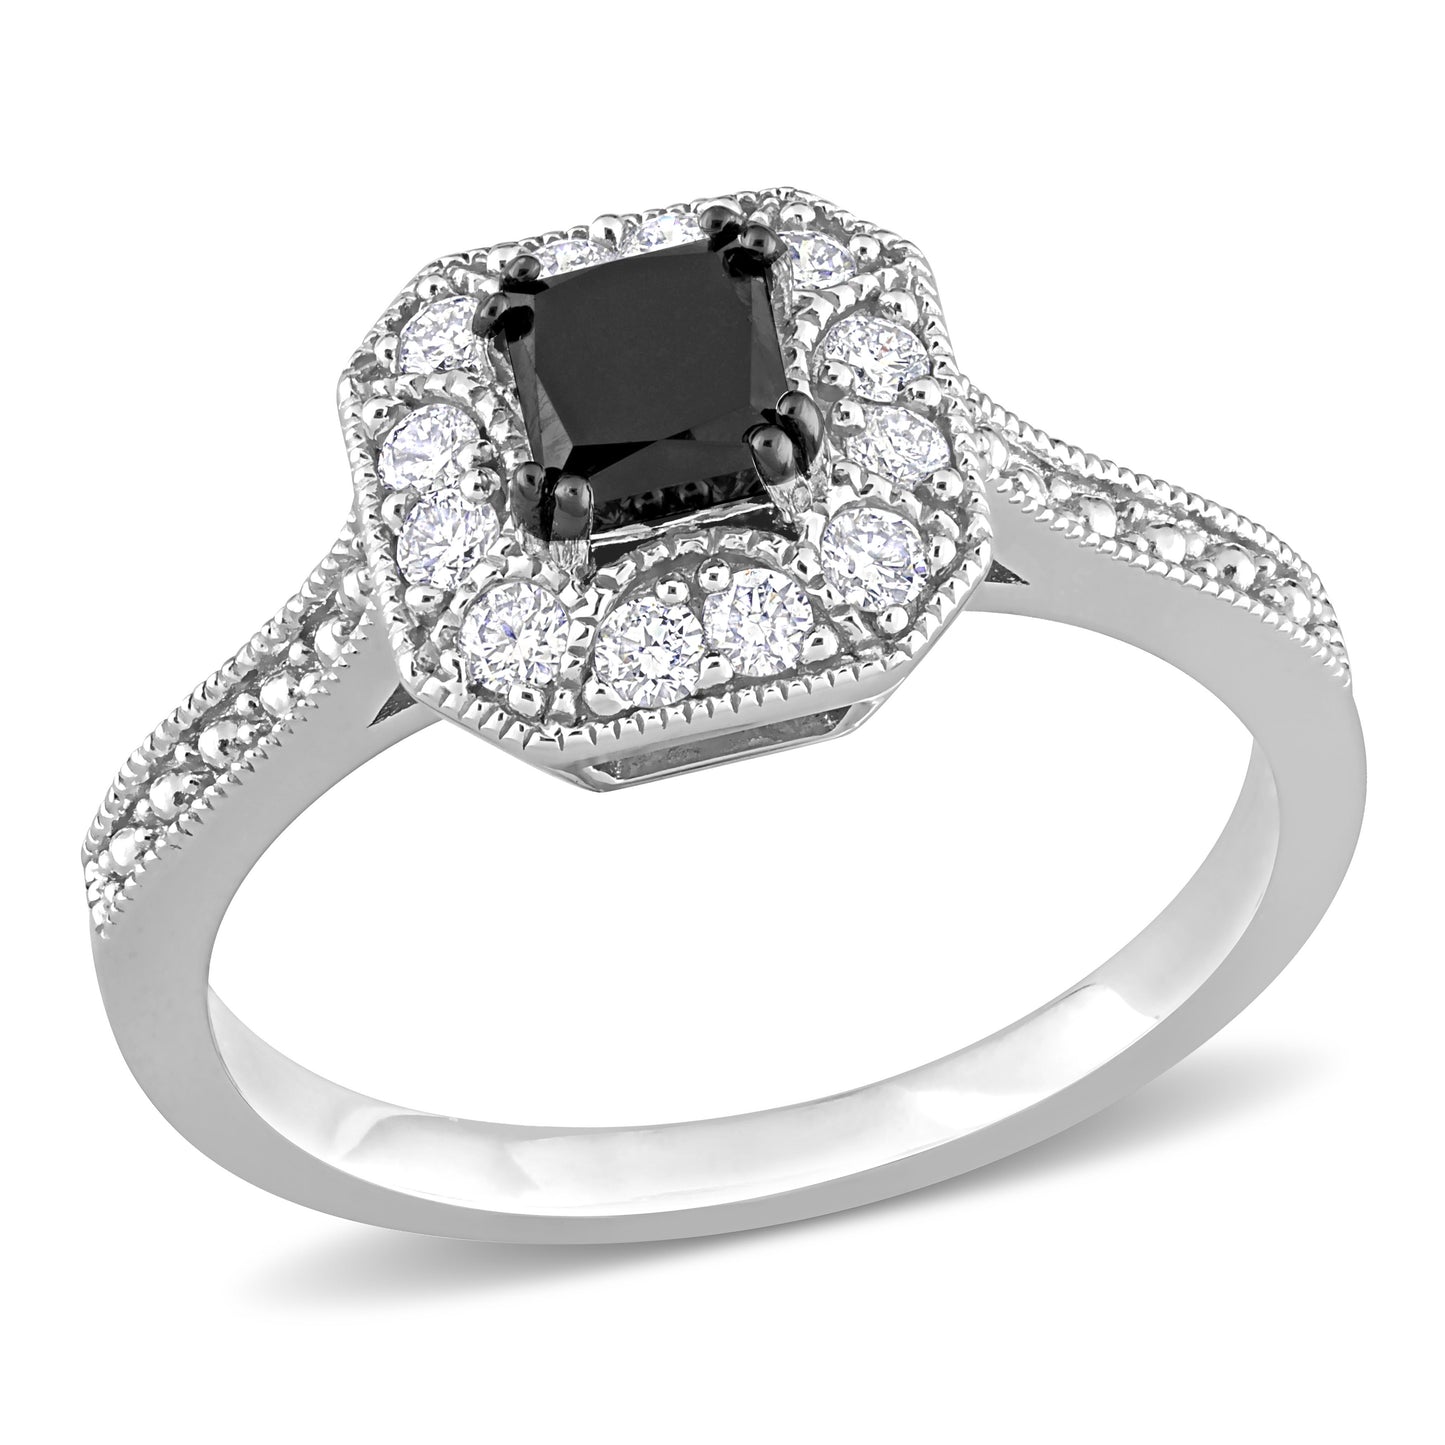 Princess Black and White Halo Diamond Engagement Ring in 10k White Gold